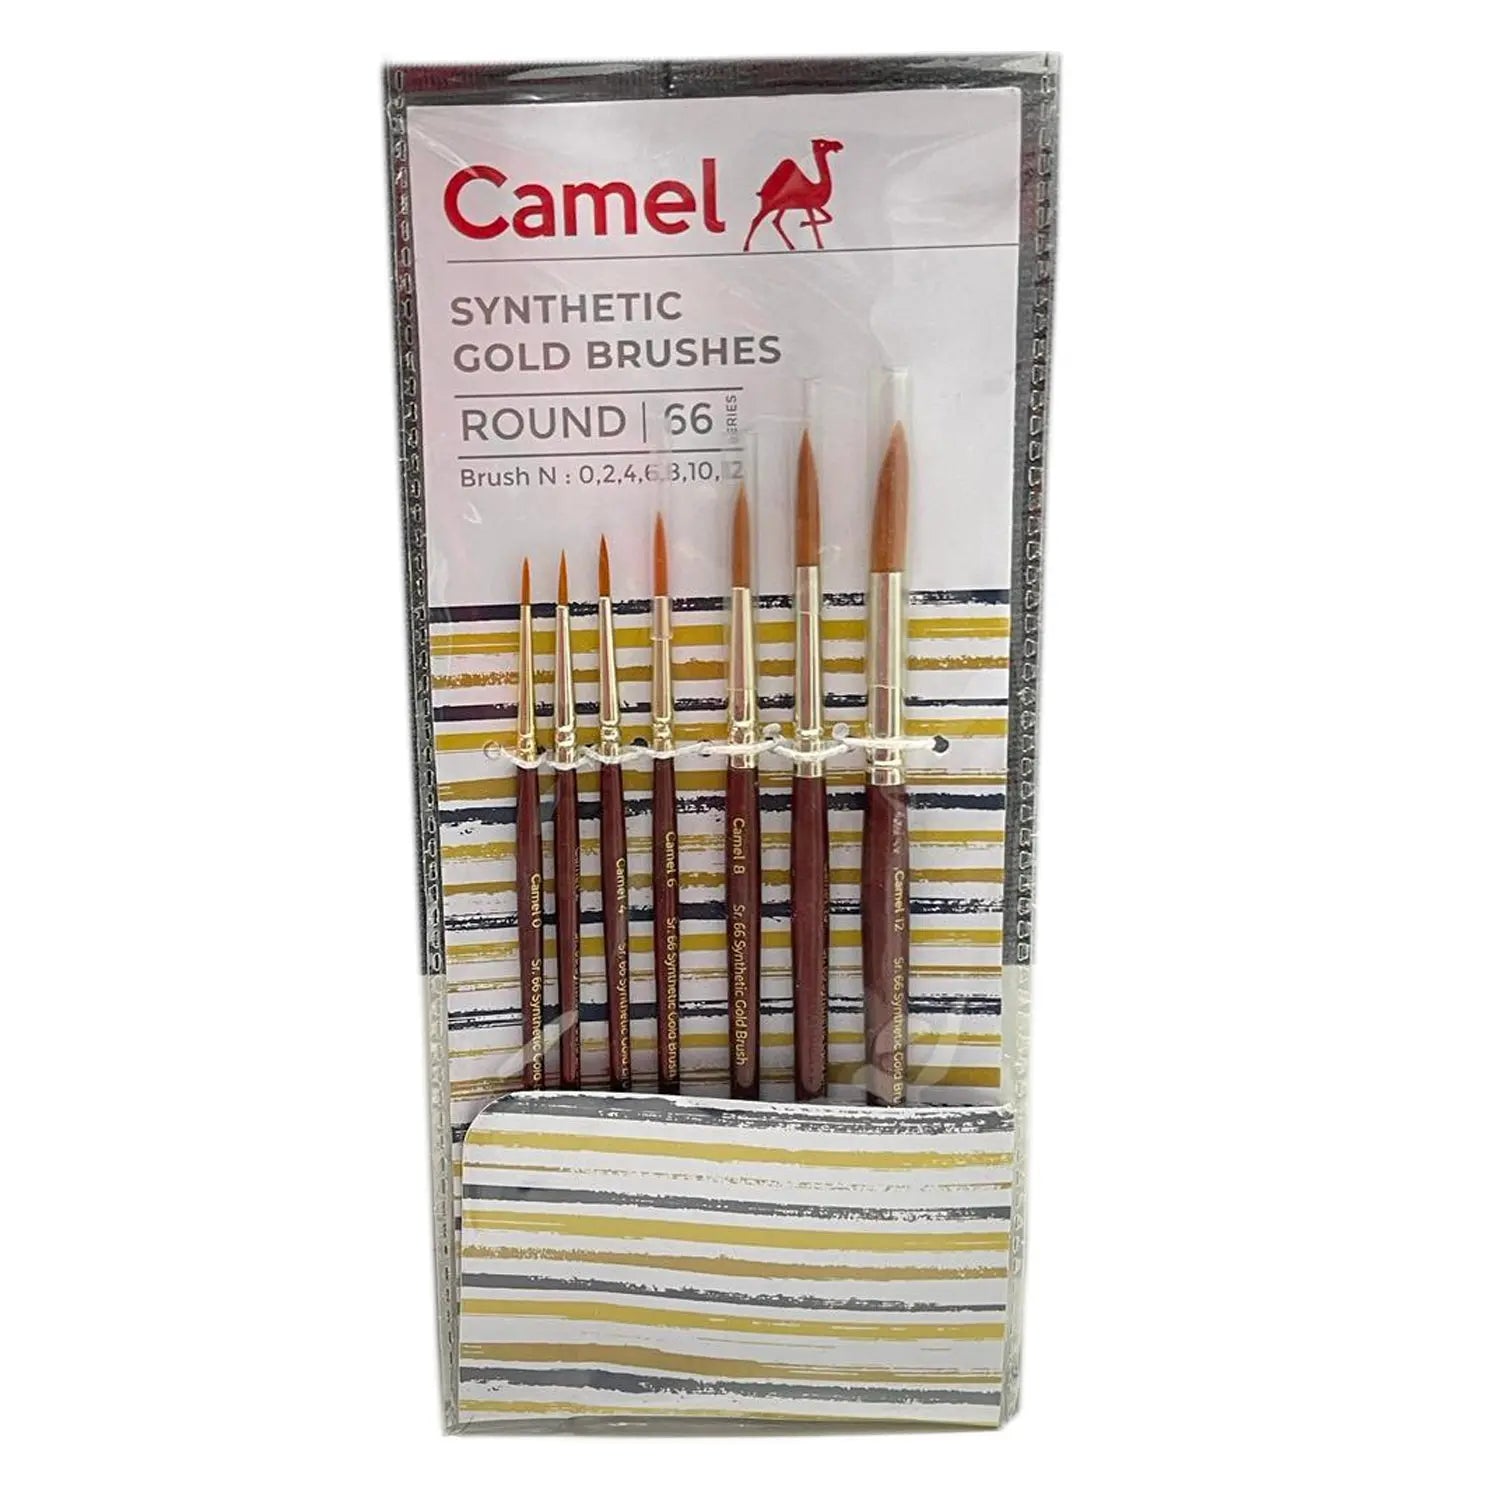 Camel Camlin Series 66 Synthetic Gold Round Brush Set Camel